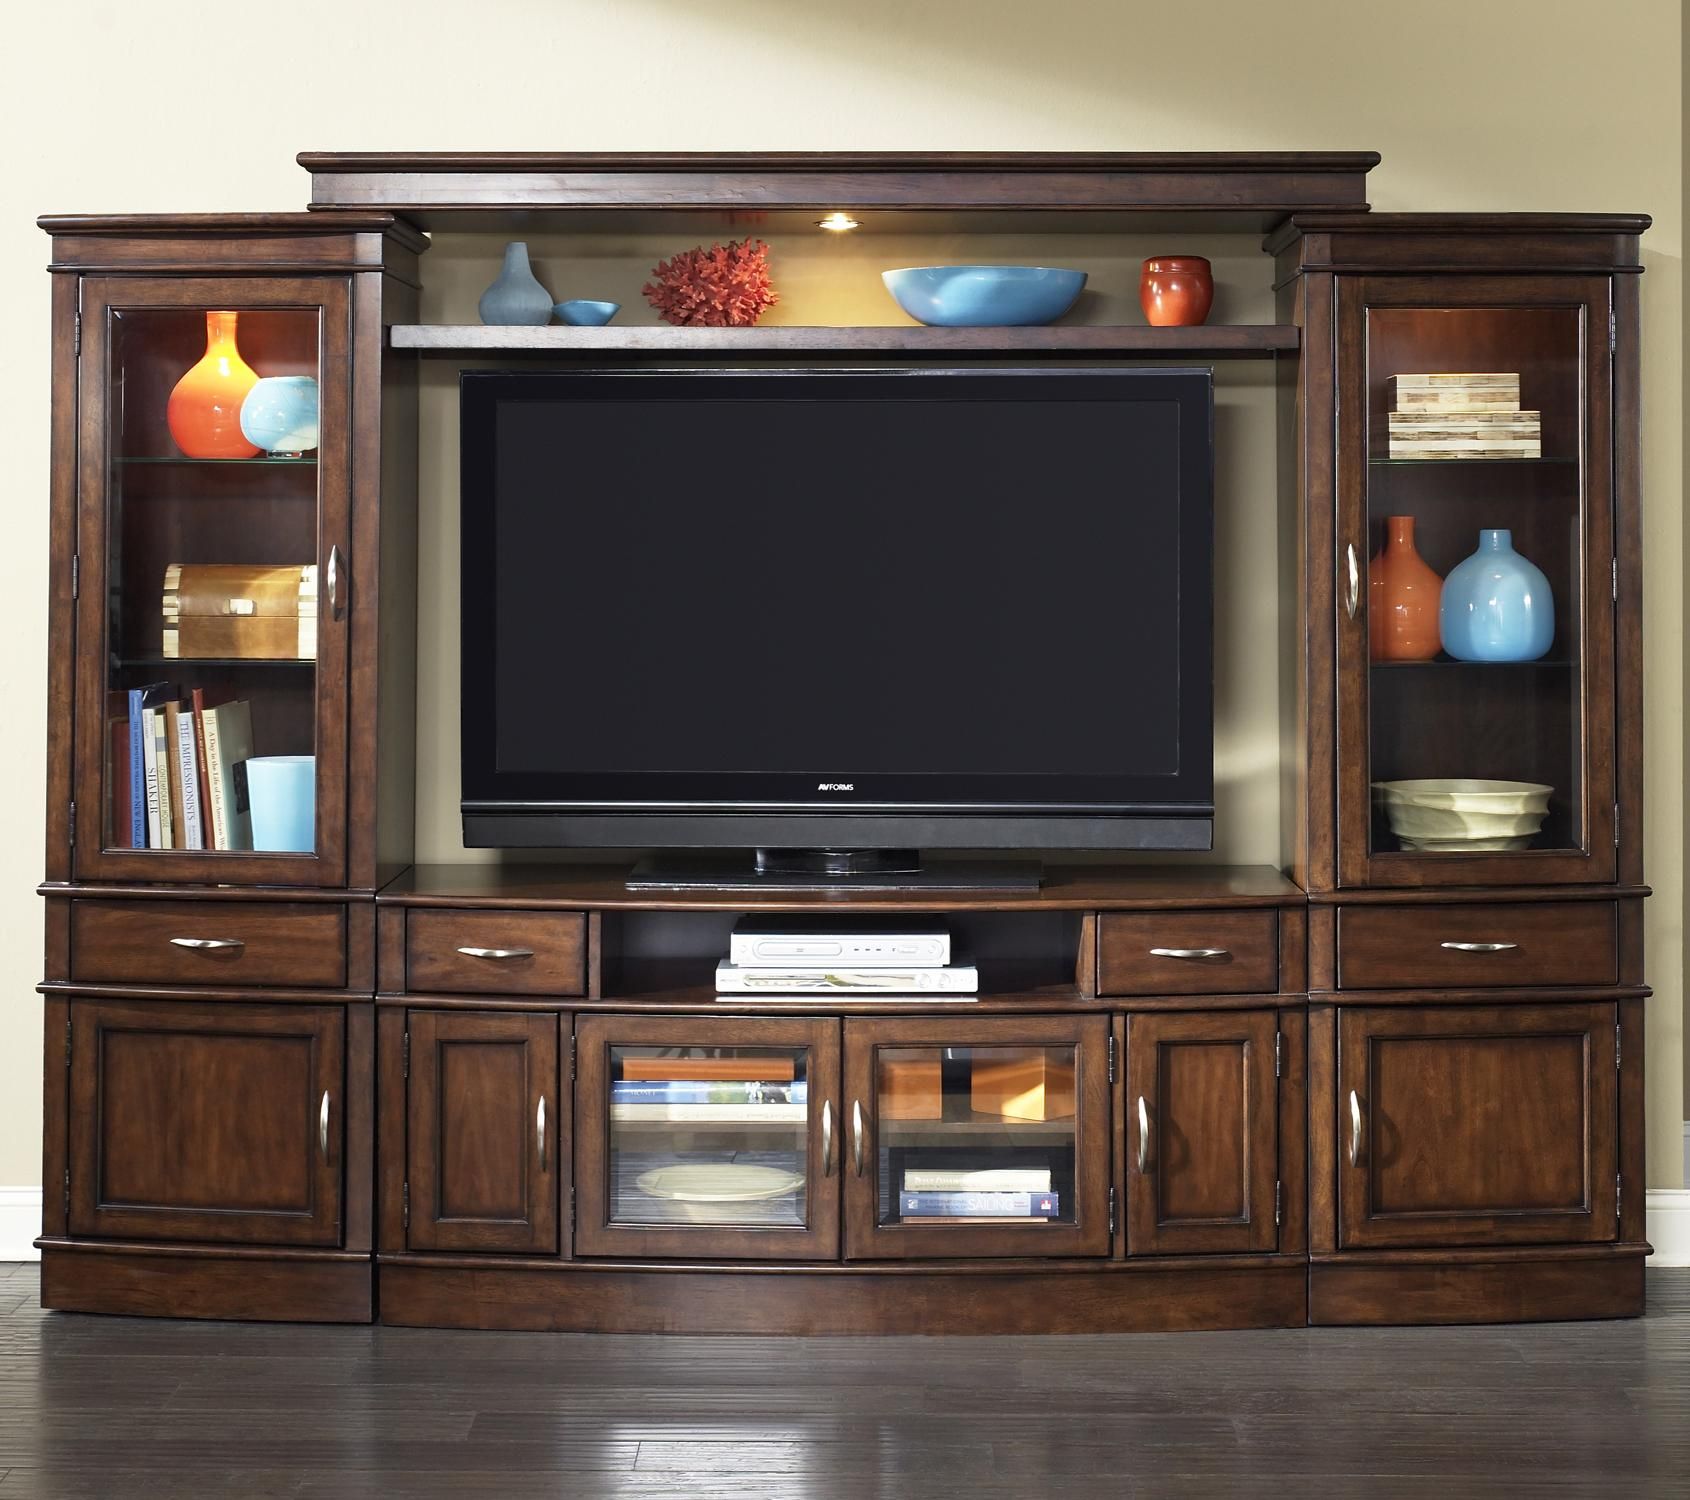 Complete Tv Entertainment Centerliberty Furniture | Wolf Furniture With Rgb Tv Entertainment Centers (View 17 of 20)